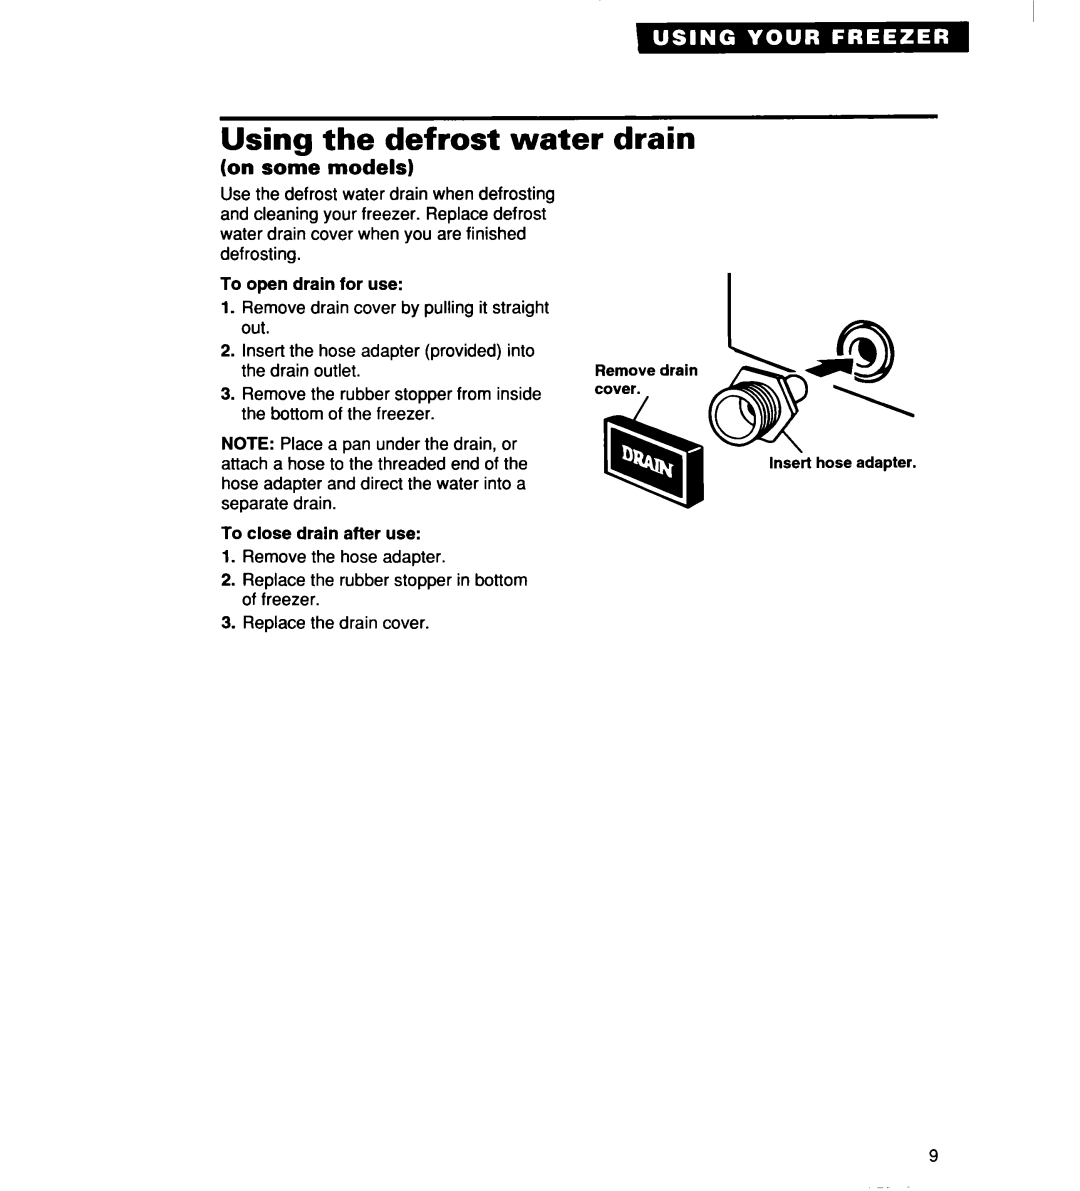 Whirlpool 2165306 warranty Using the defrost water drain, on some models 